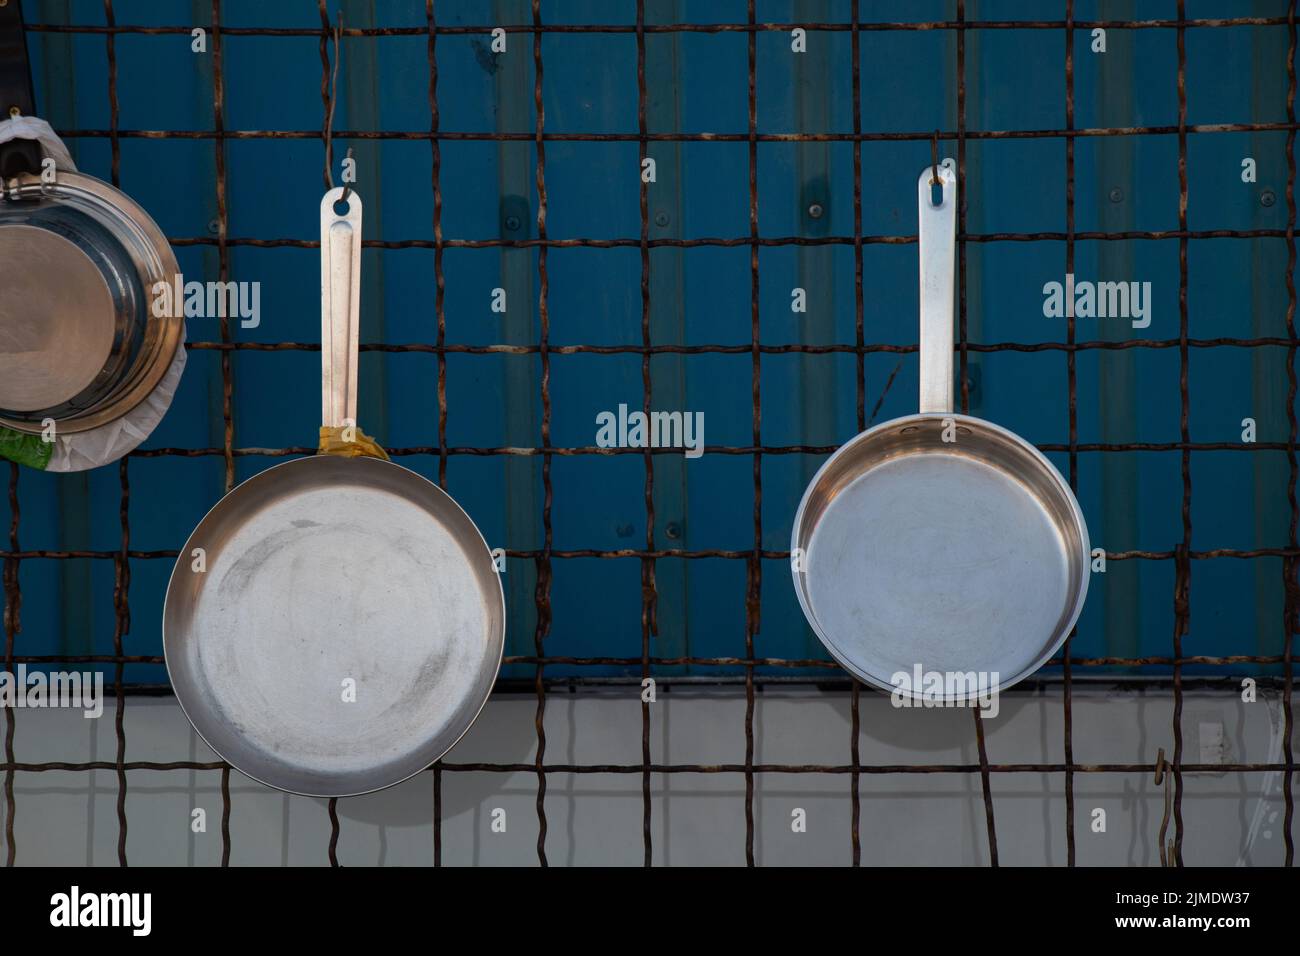 https://c8.alamy.com/comp/2JMDW37/cast-iron-pans-hang-on-grates-on-the-wall-kitchen-utensils-are-new-and-clean-2JMDW37.jpg